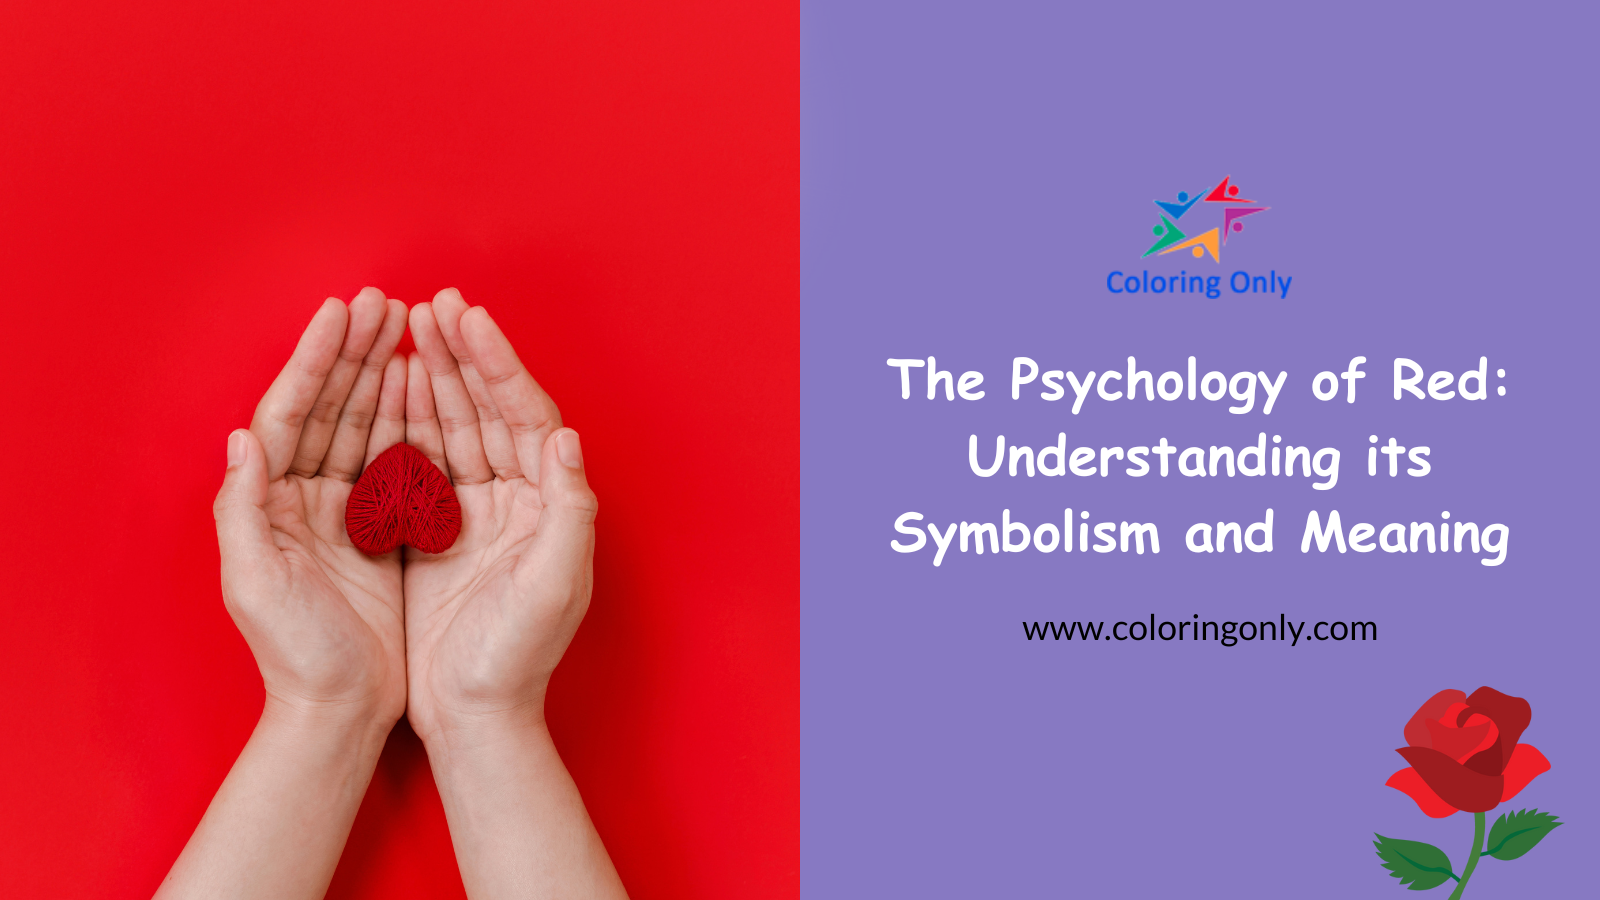 The Psychology of Red: Understanding its Symbolism and Meaning